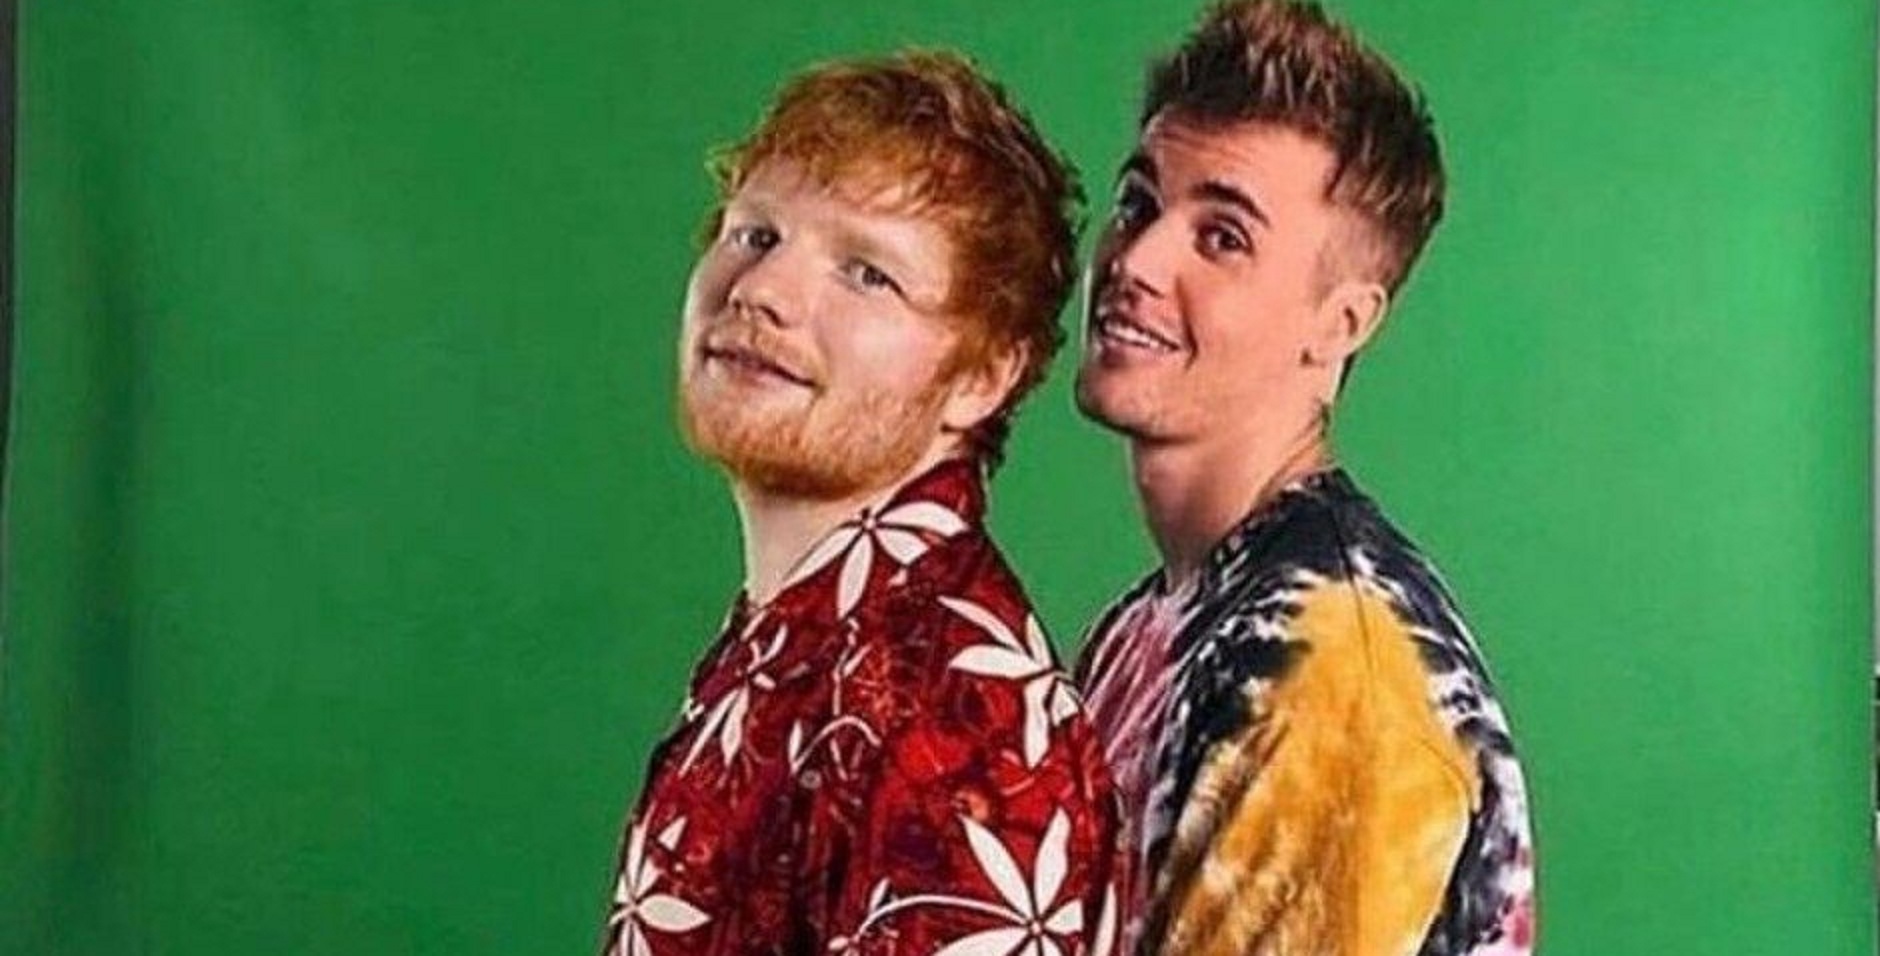 Justin Bieber and Ed Sheeran’s New Single ‘I Don’t Care’ Breaks Single-Day Spotify Record. Listen To It Here!